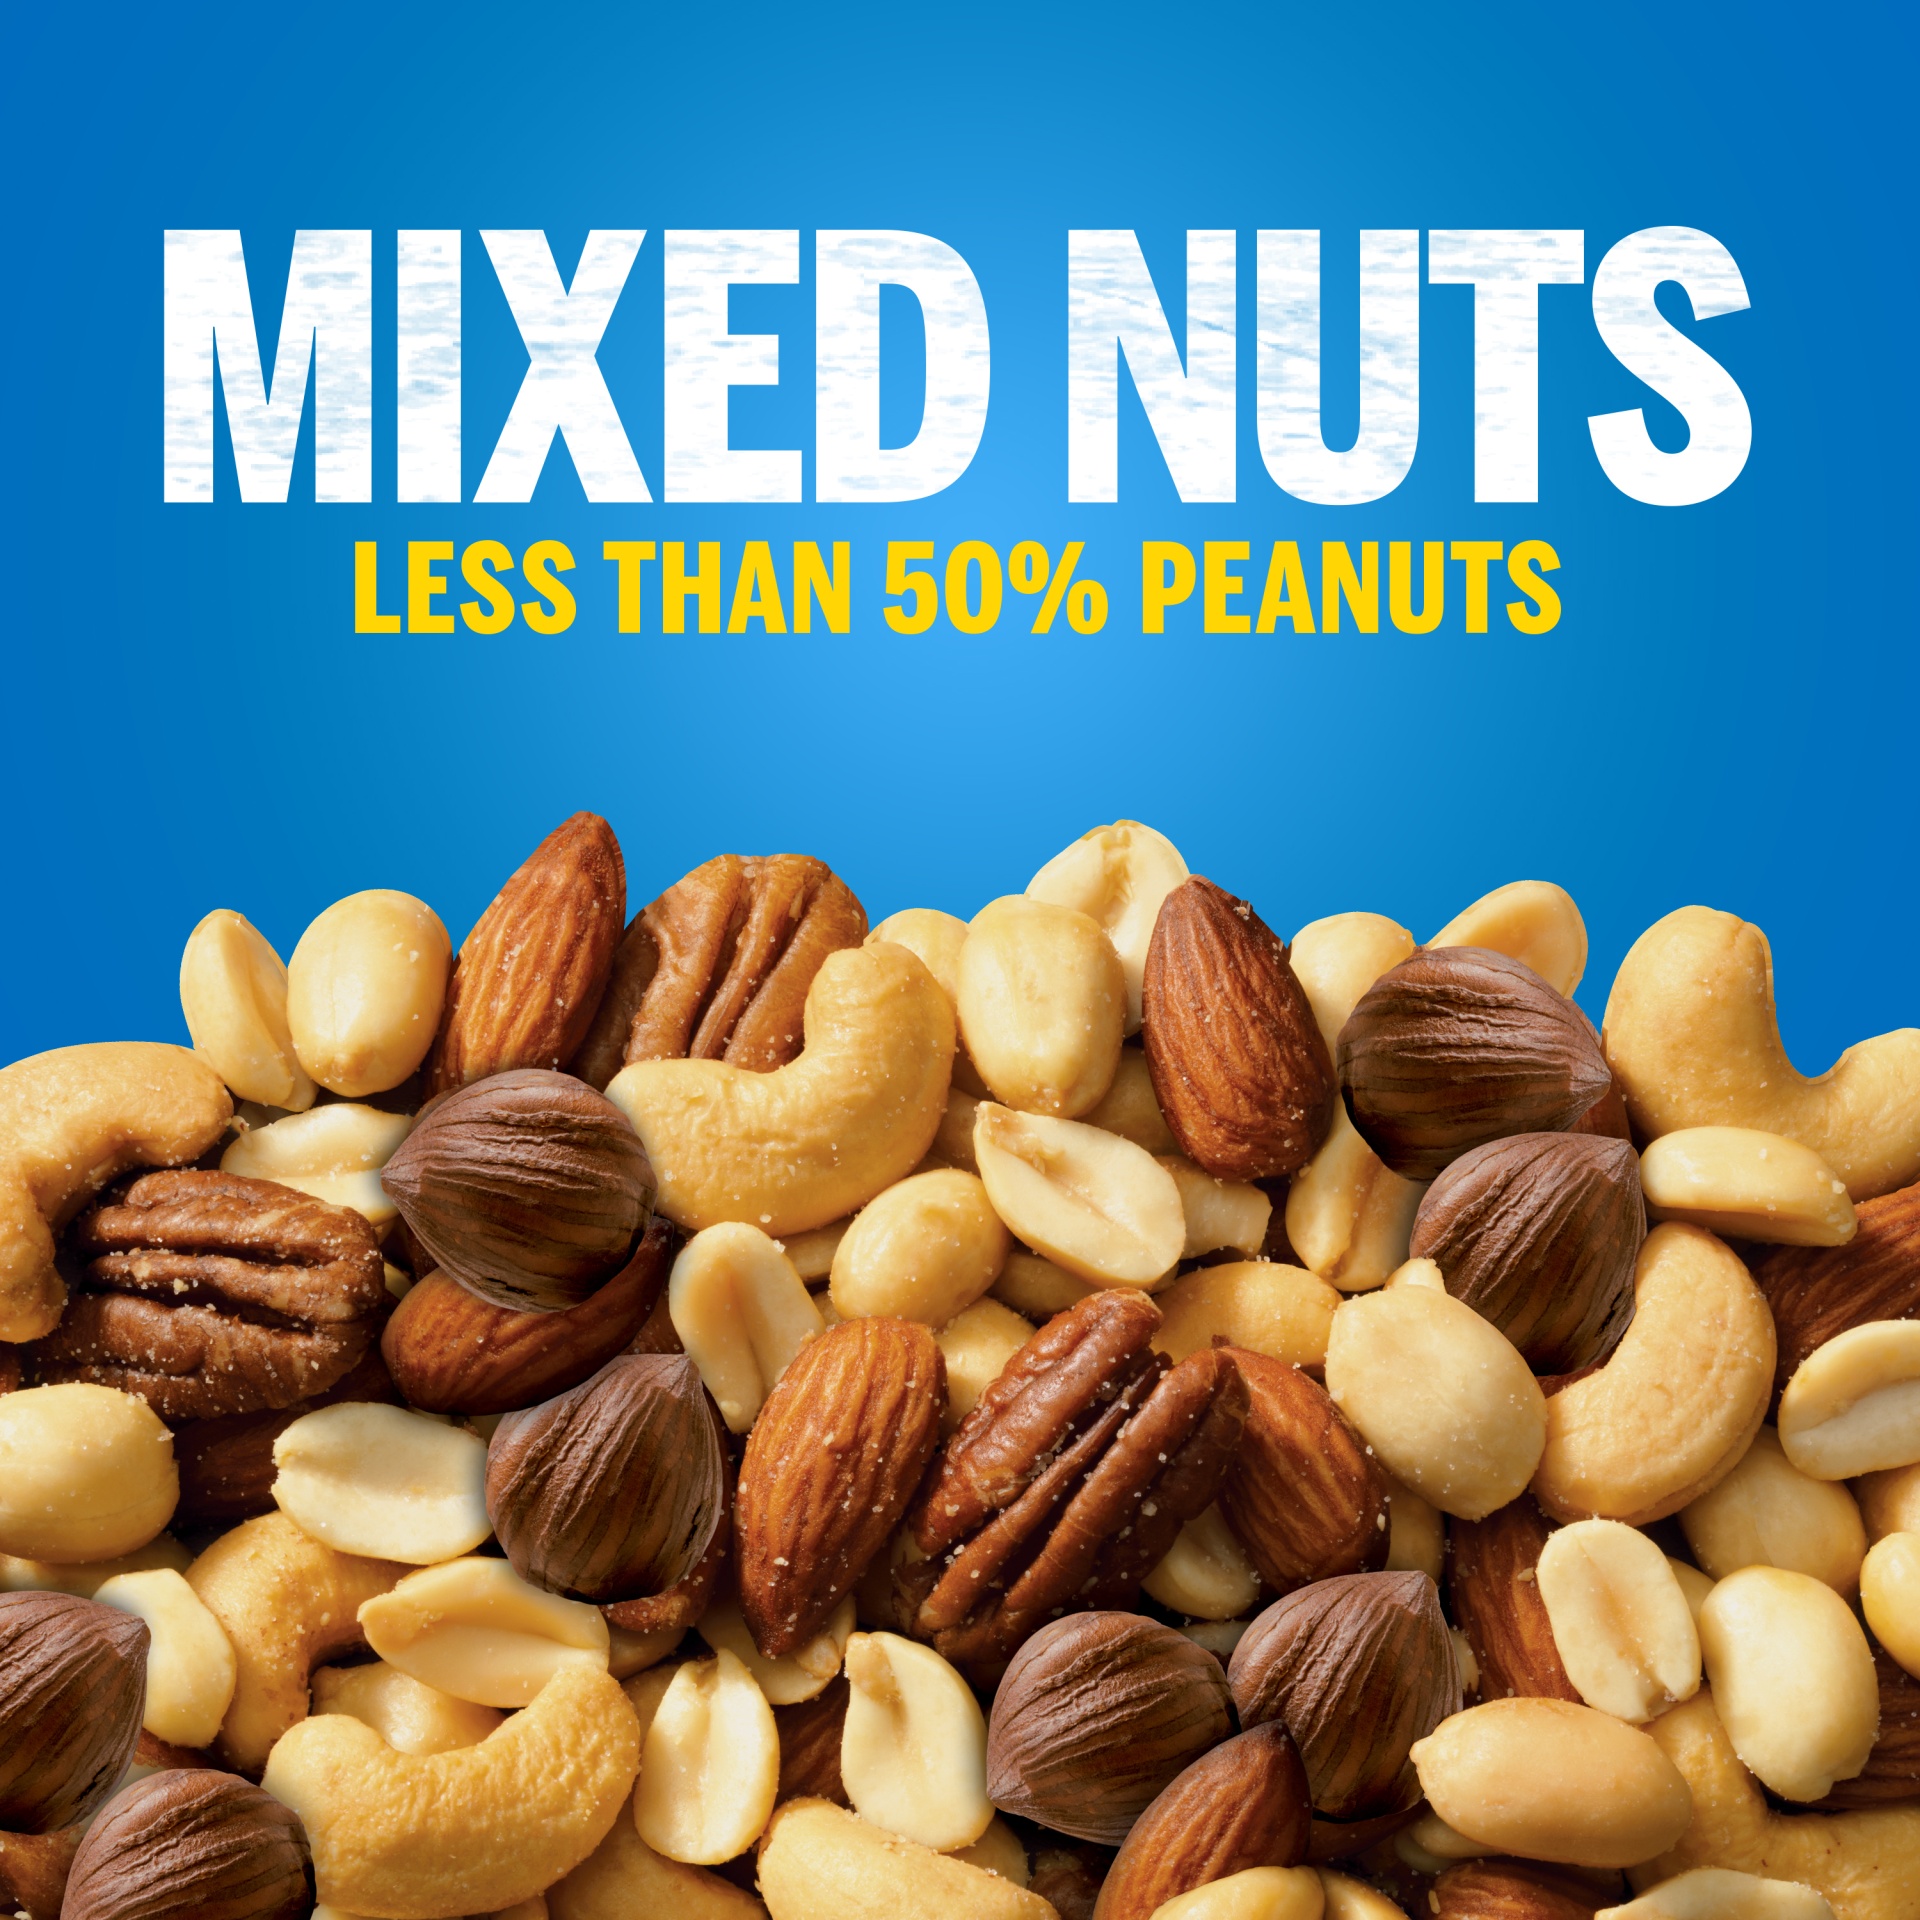 slide 9 of 14, Planters Mixed Nuts Less Than 50% Peanuts with Peanuts, Almonds, Cashews, Pecans & Hazelnuts, 27 oz